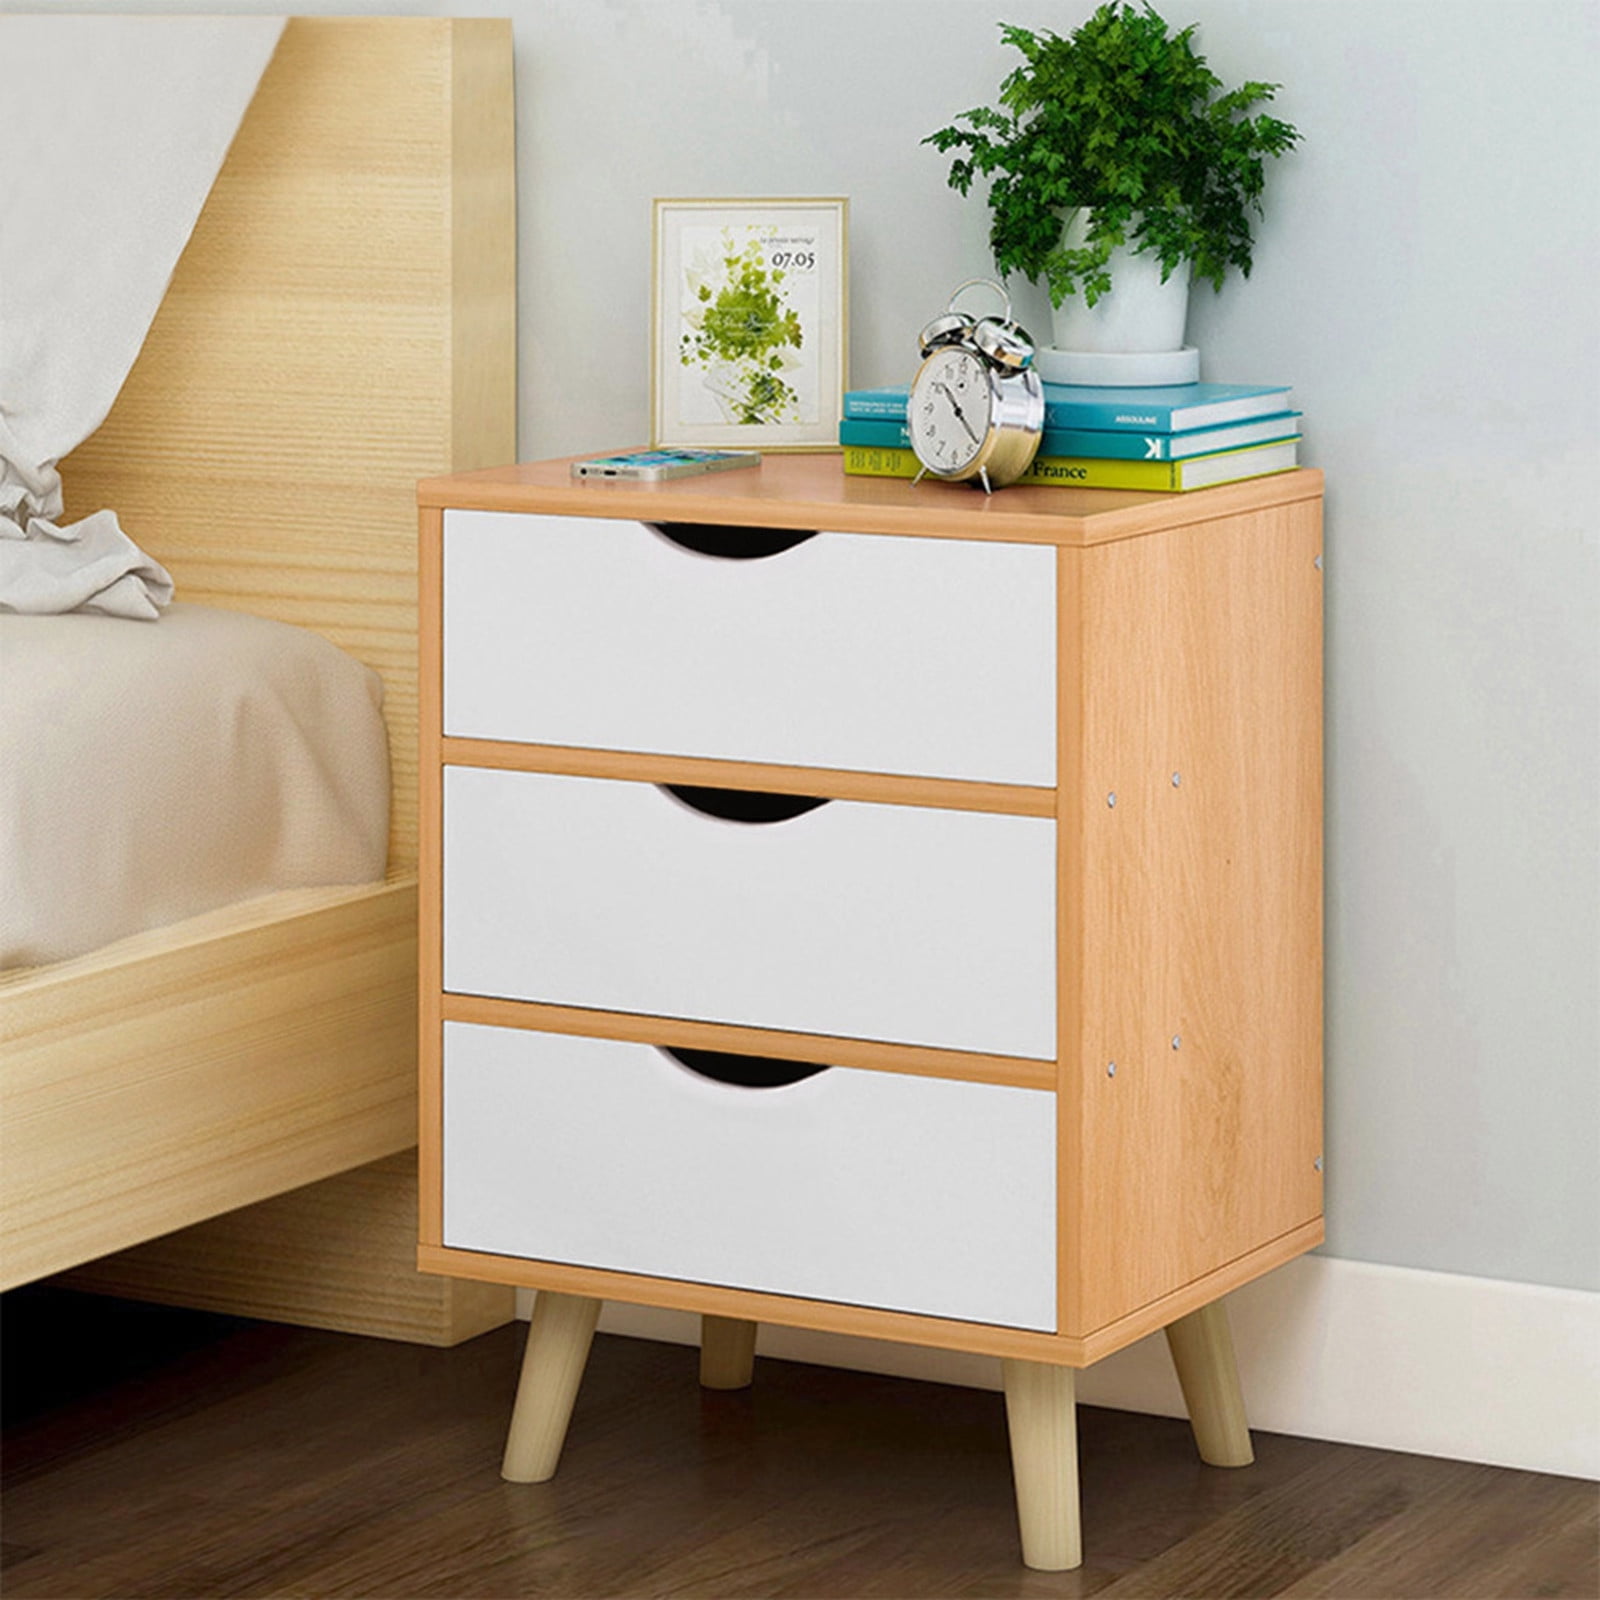 Details about   Bedside Table Drawer Cabinet Small Side End Table Nightstand Storage Organizer 